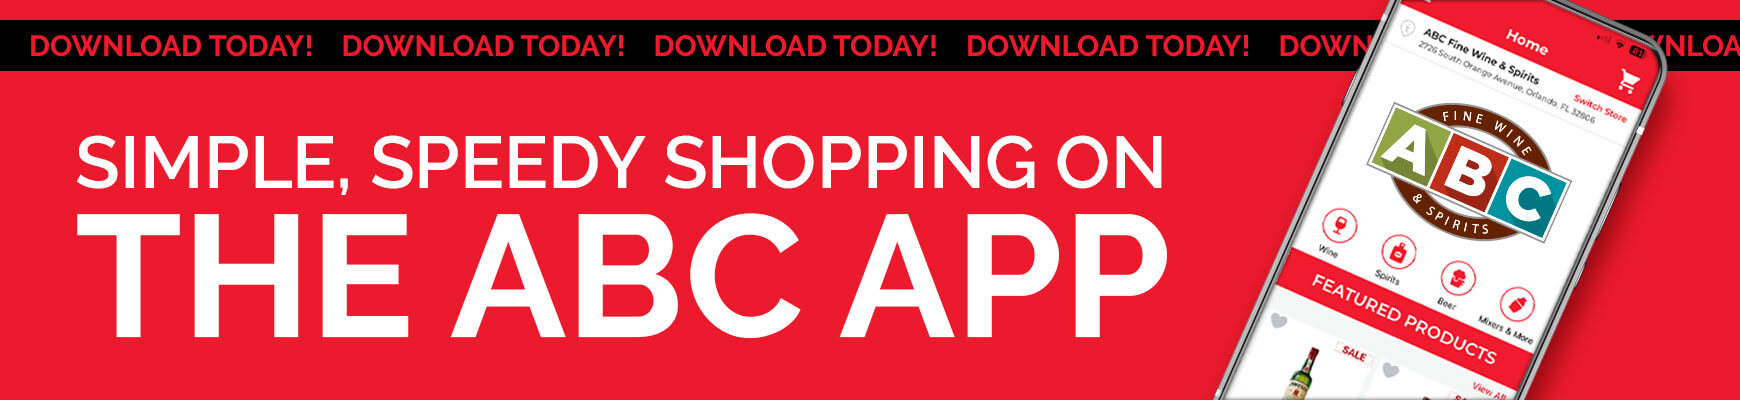 ABC Fine Wine & Spirits App Banner. Download Today! Simple, speedy shopping on the ABC App.